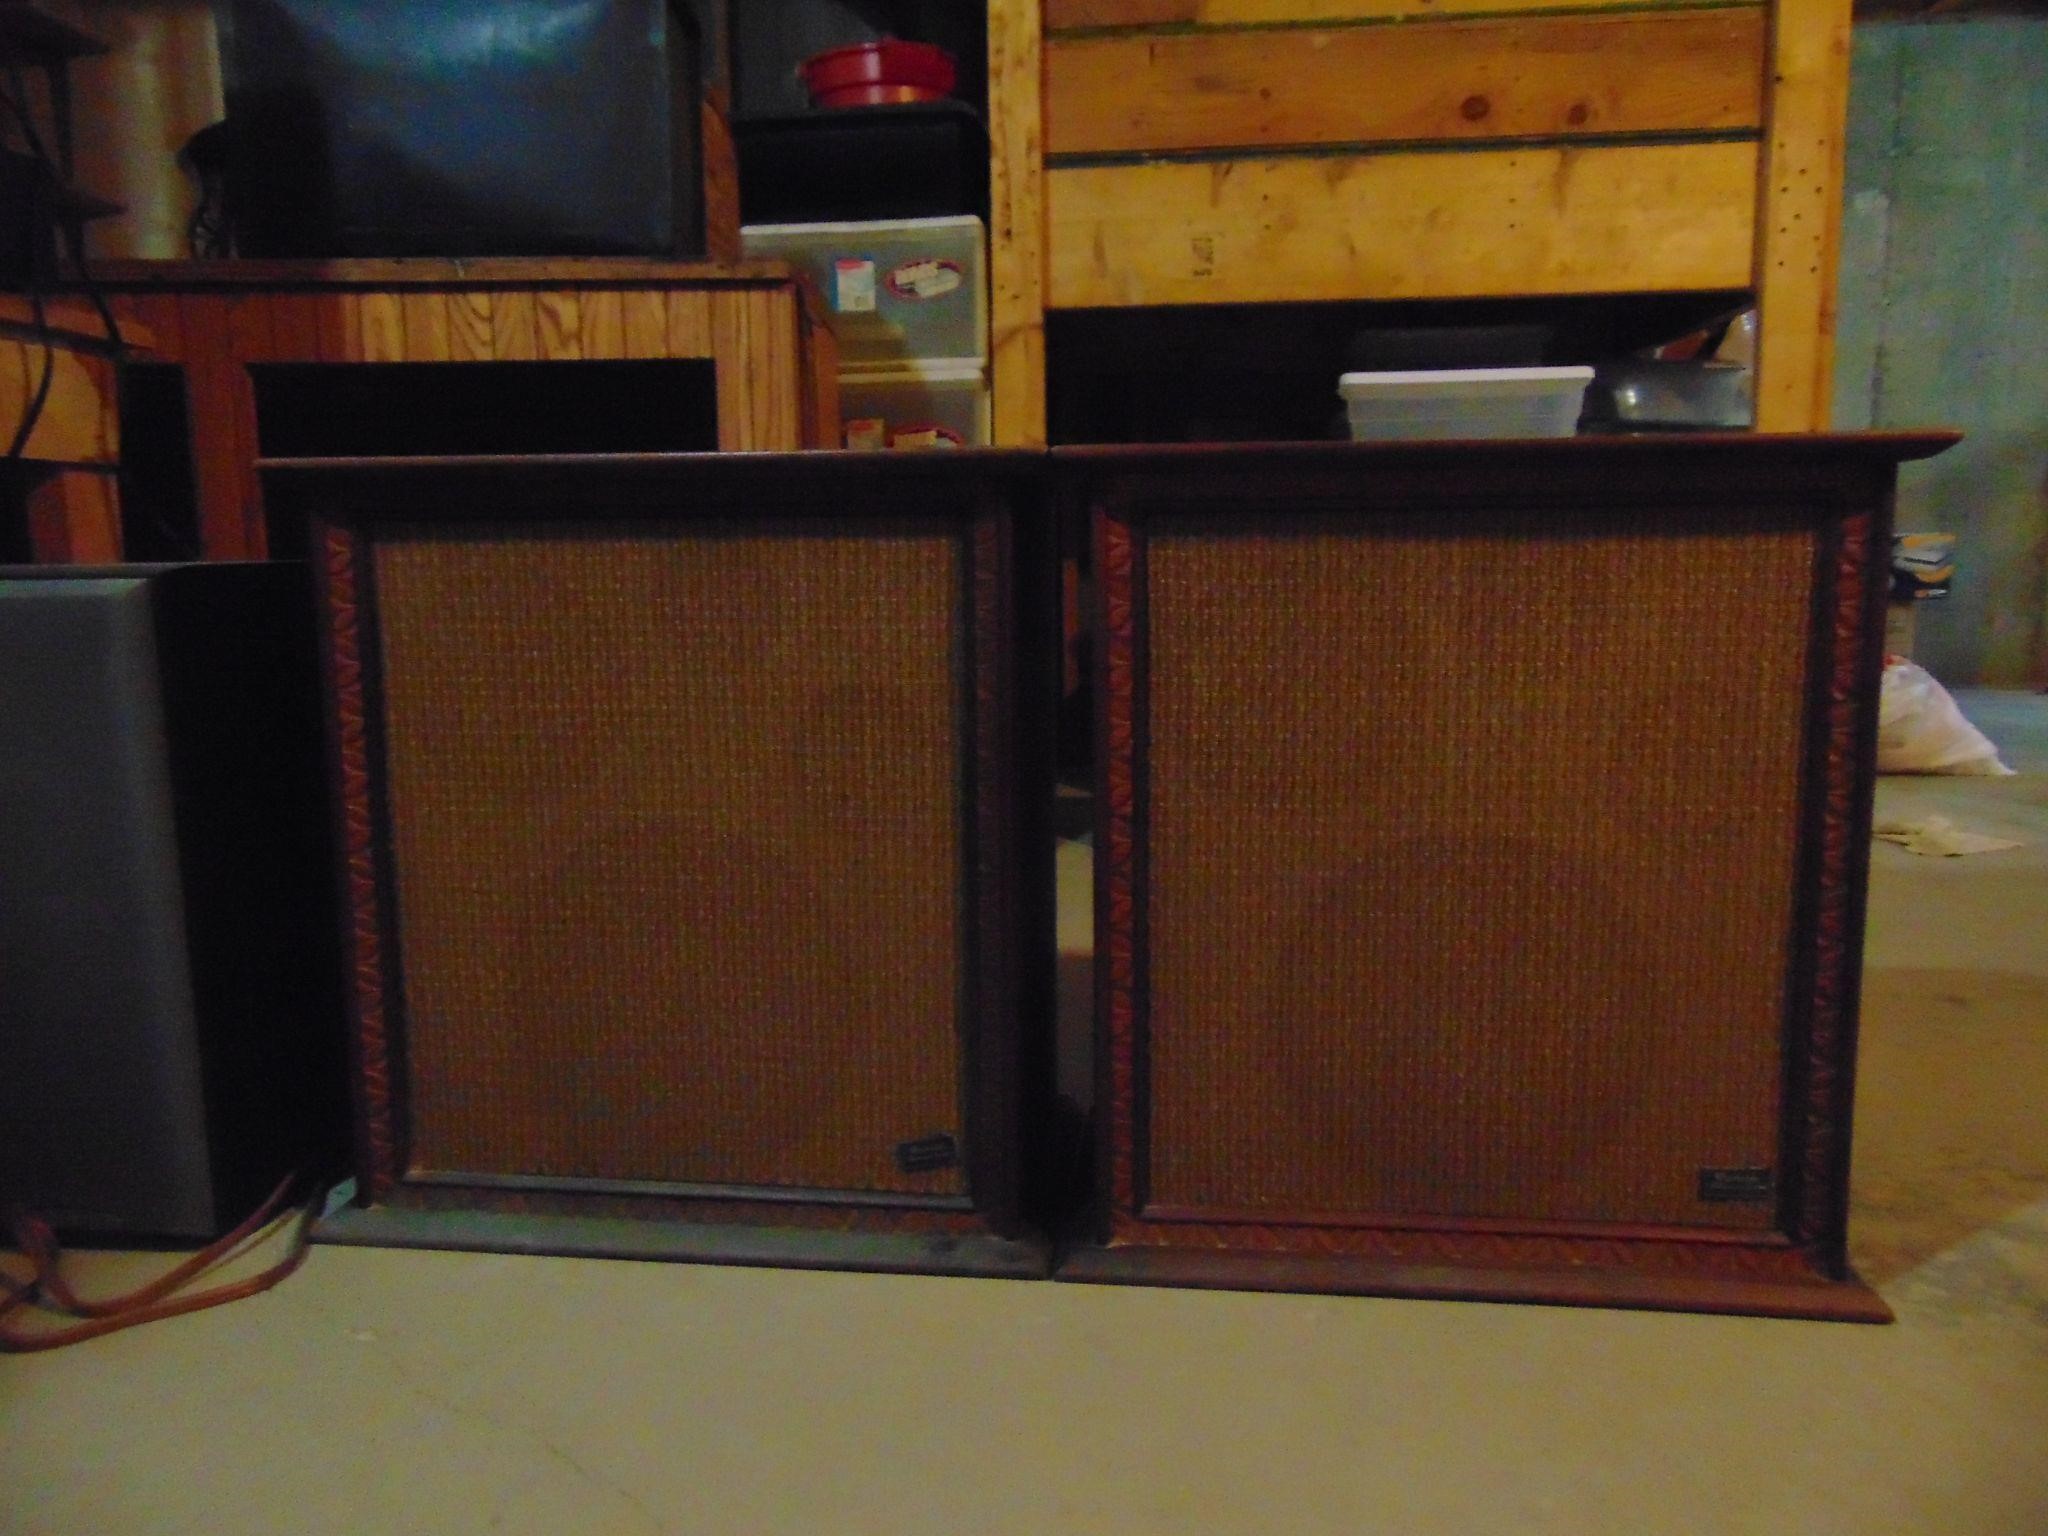 2 Large home speakers. Very heavy